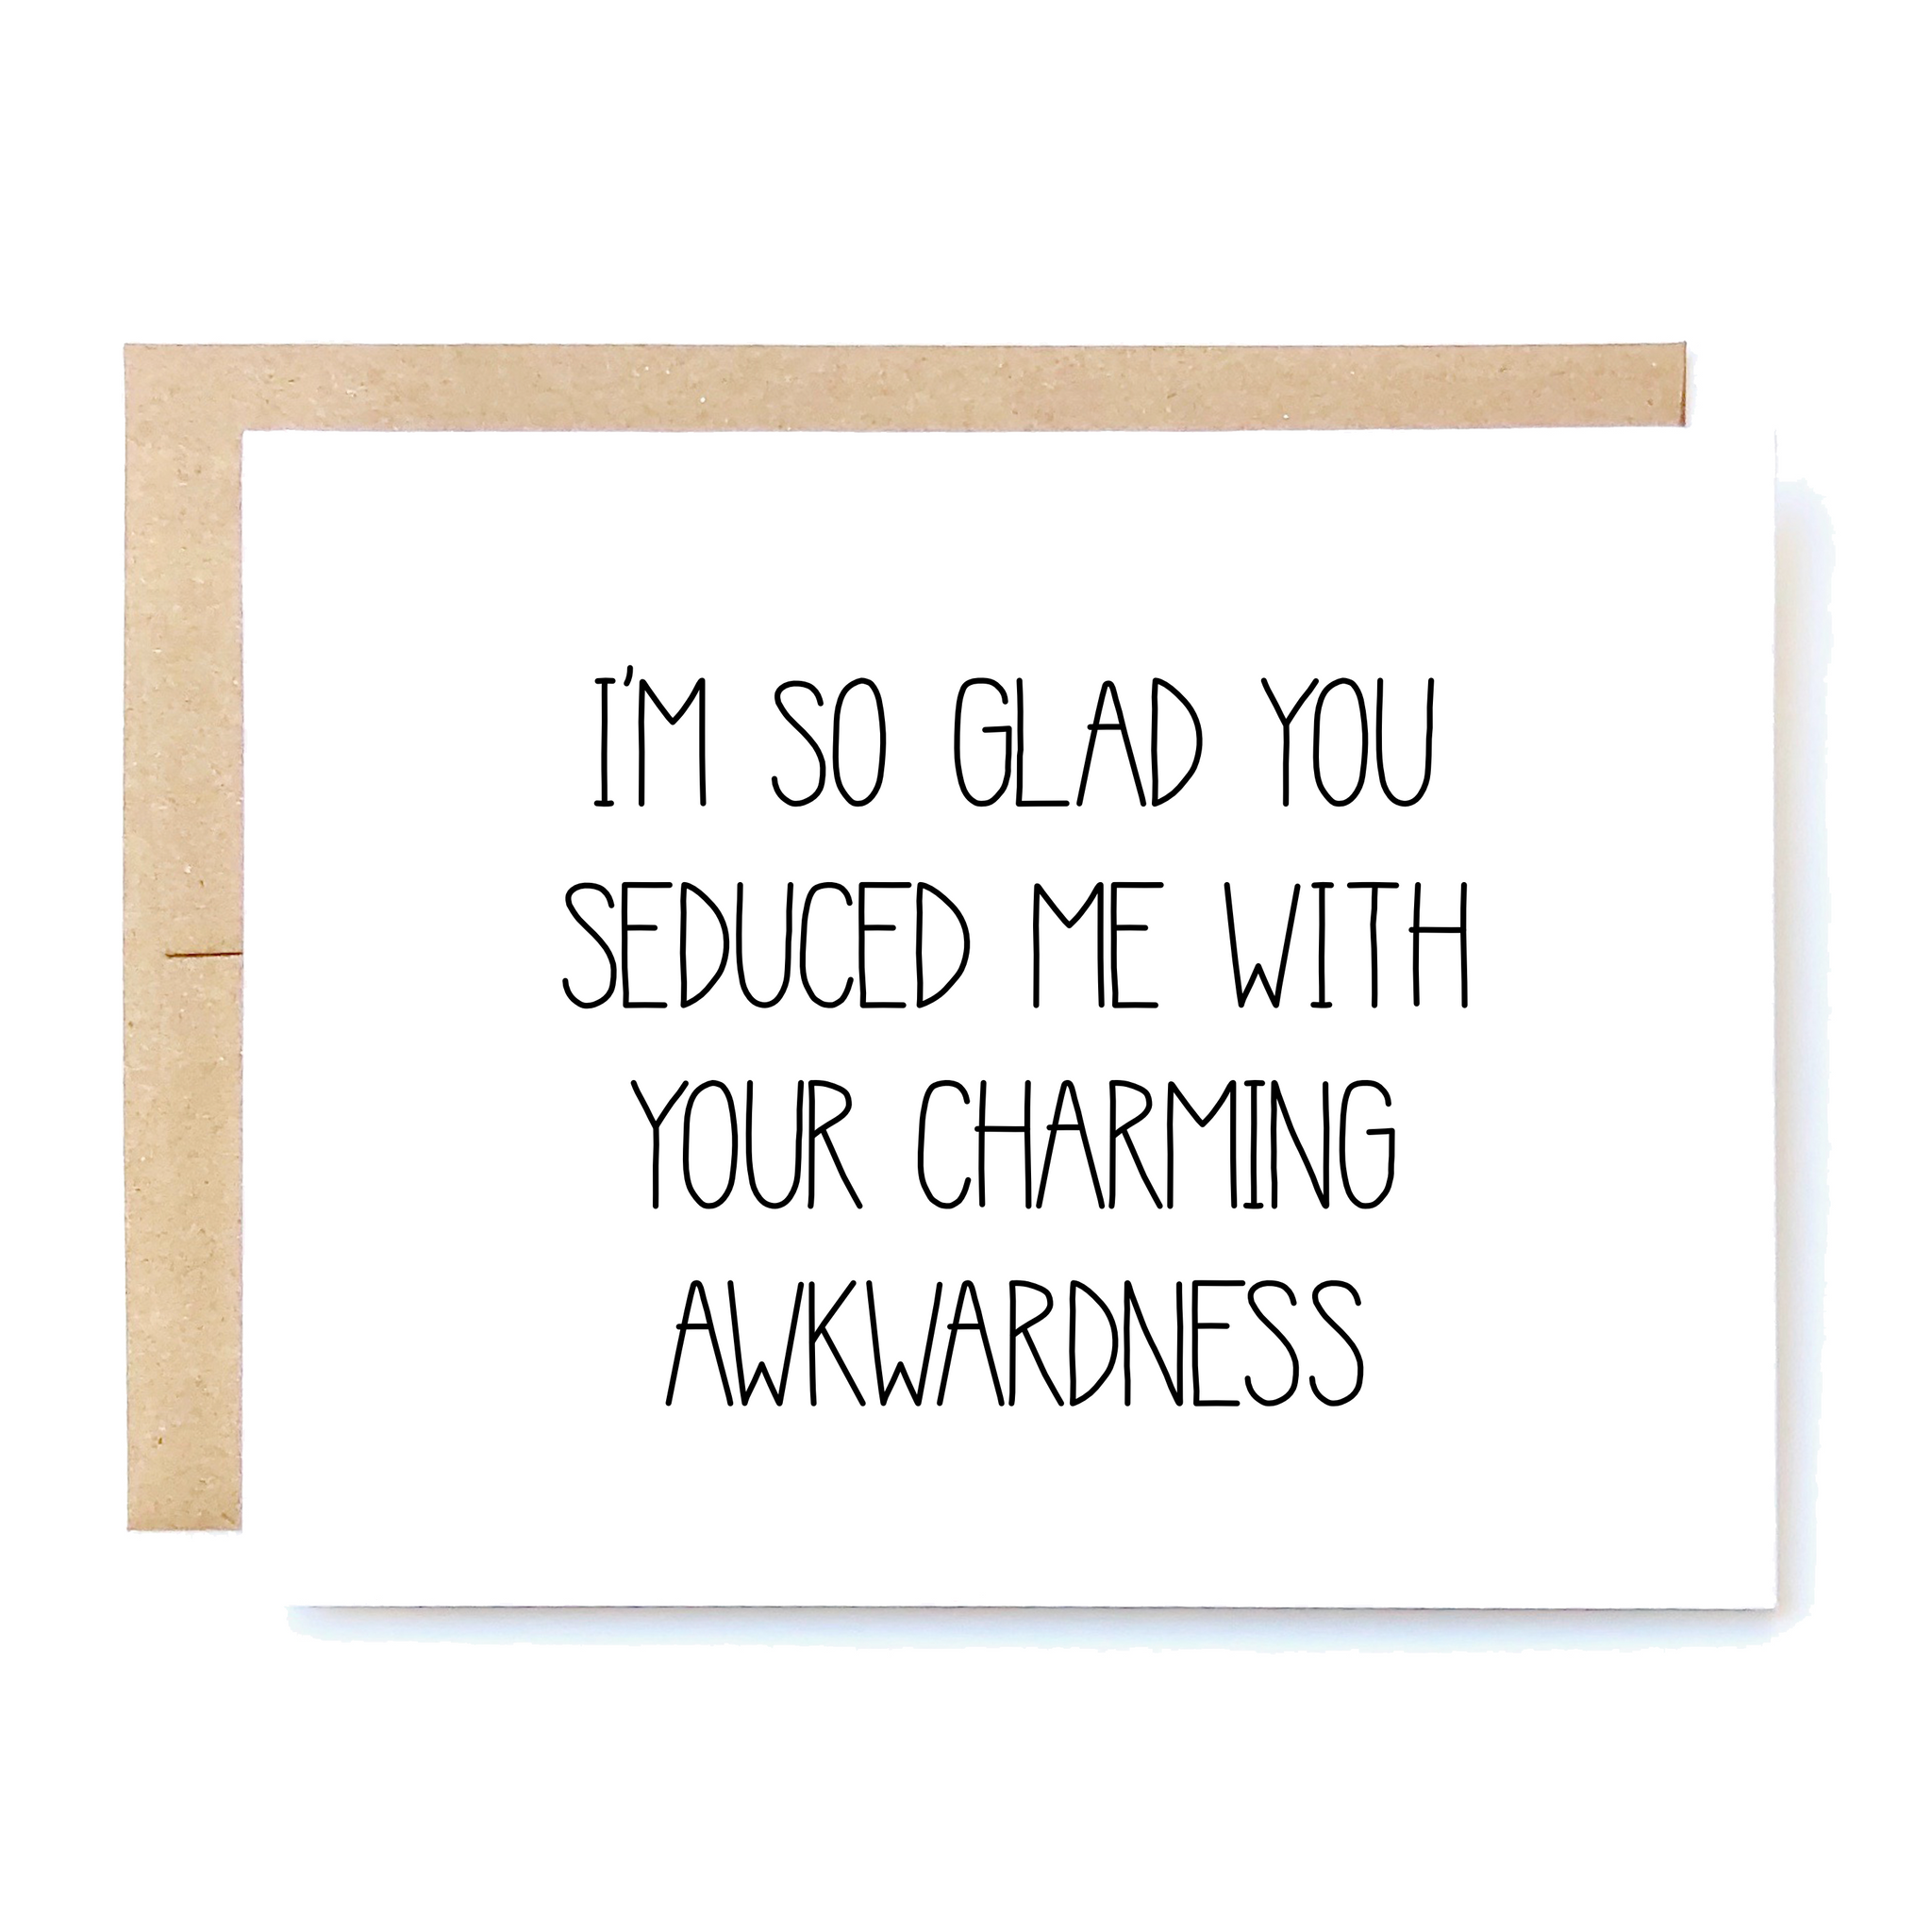 Card Front: I'm so glad you seduced me with your charming awkwardness.